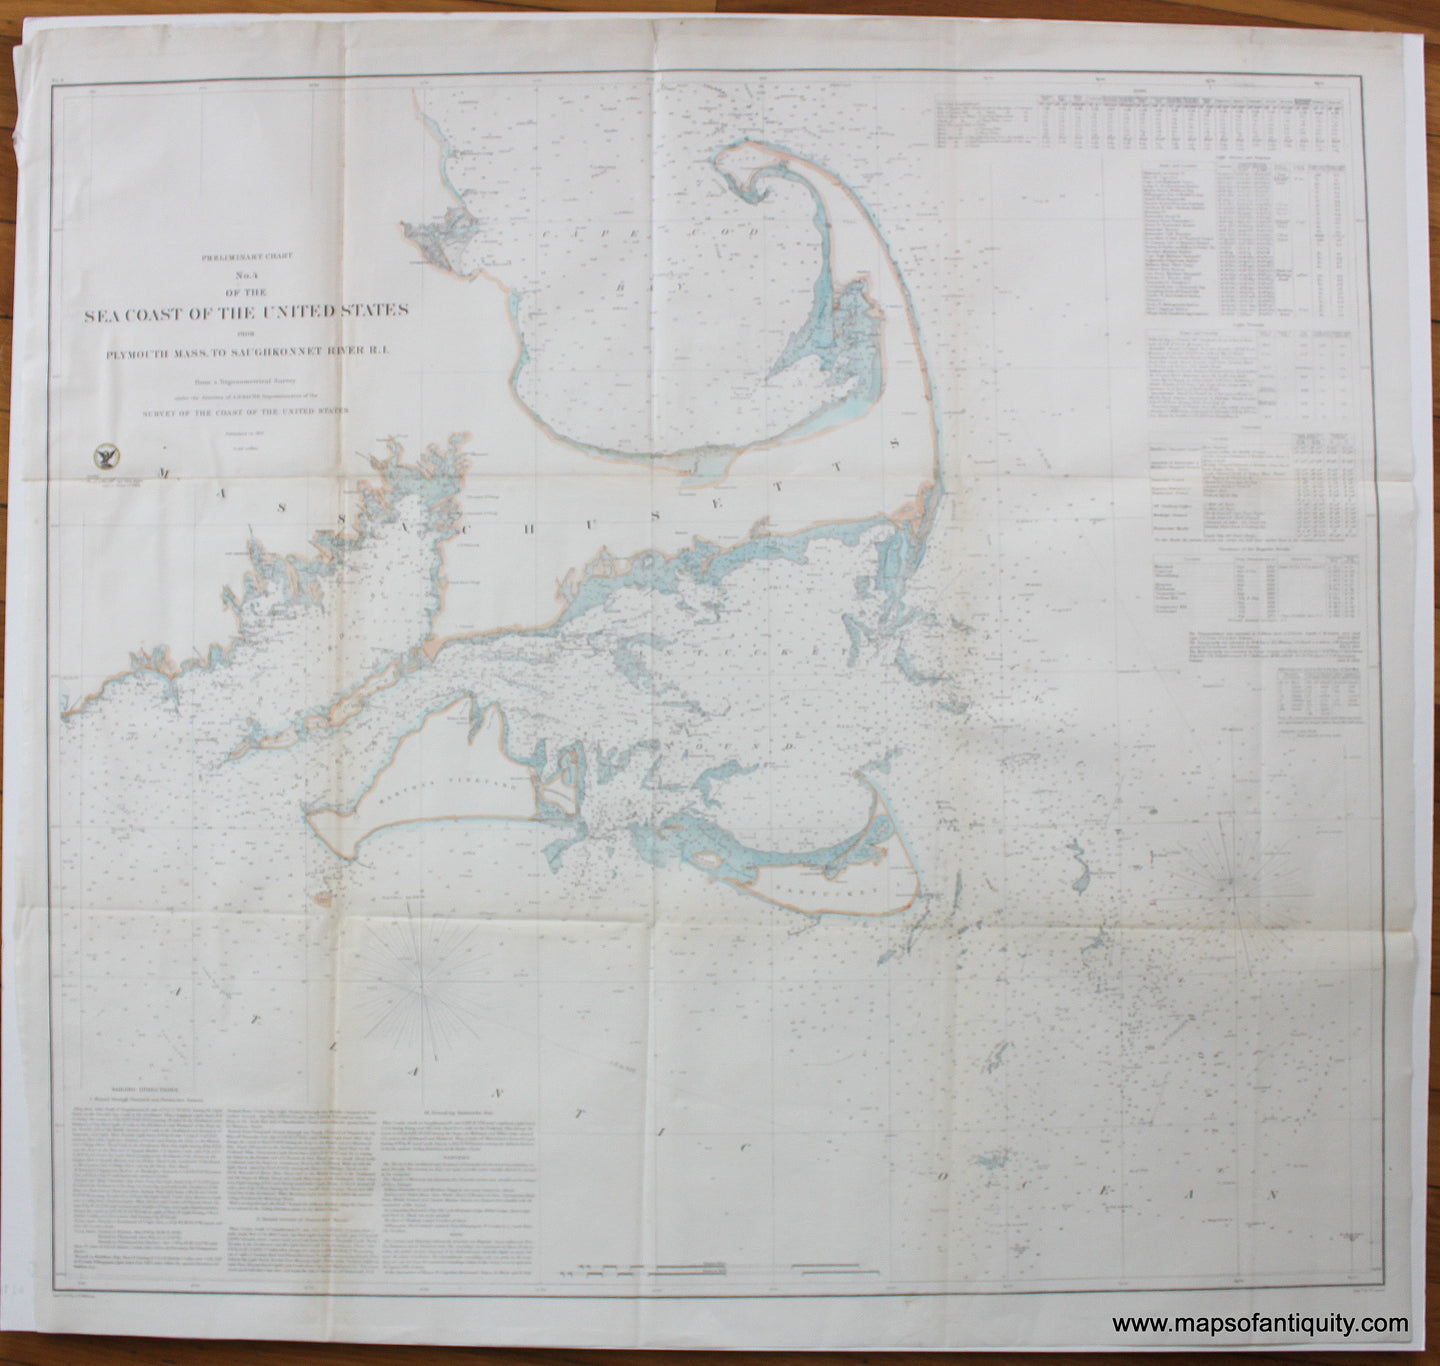 Hand-Colored-Antique--Nautical-Chart-Preliminary-Chart-No.-4-of-the-Seacoast-of-the-United-States-from-Plymouth-Mass.-to-Saughkonnet-River-R.I.-**********--US-Massachusetts-1857-U.S.-Coast-Survey-Maps-Of-Antiquity